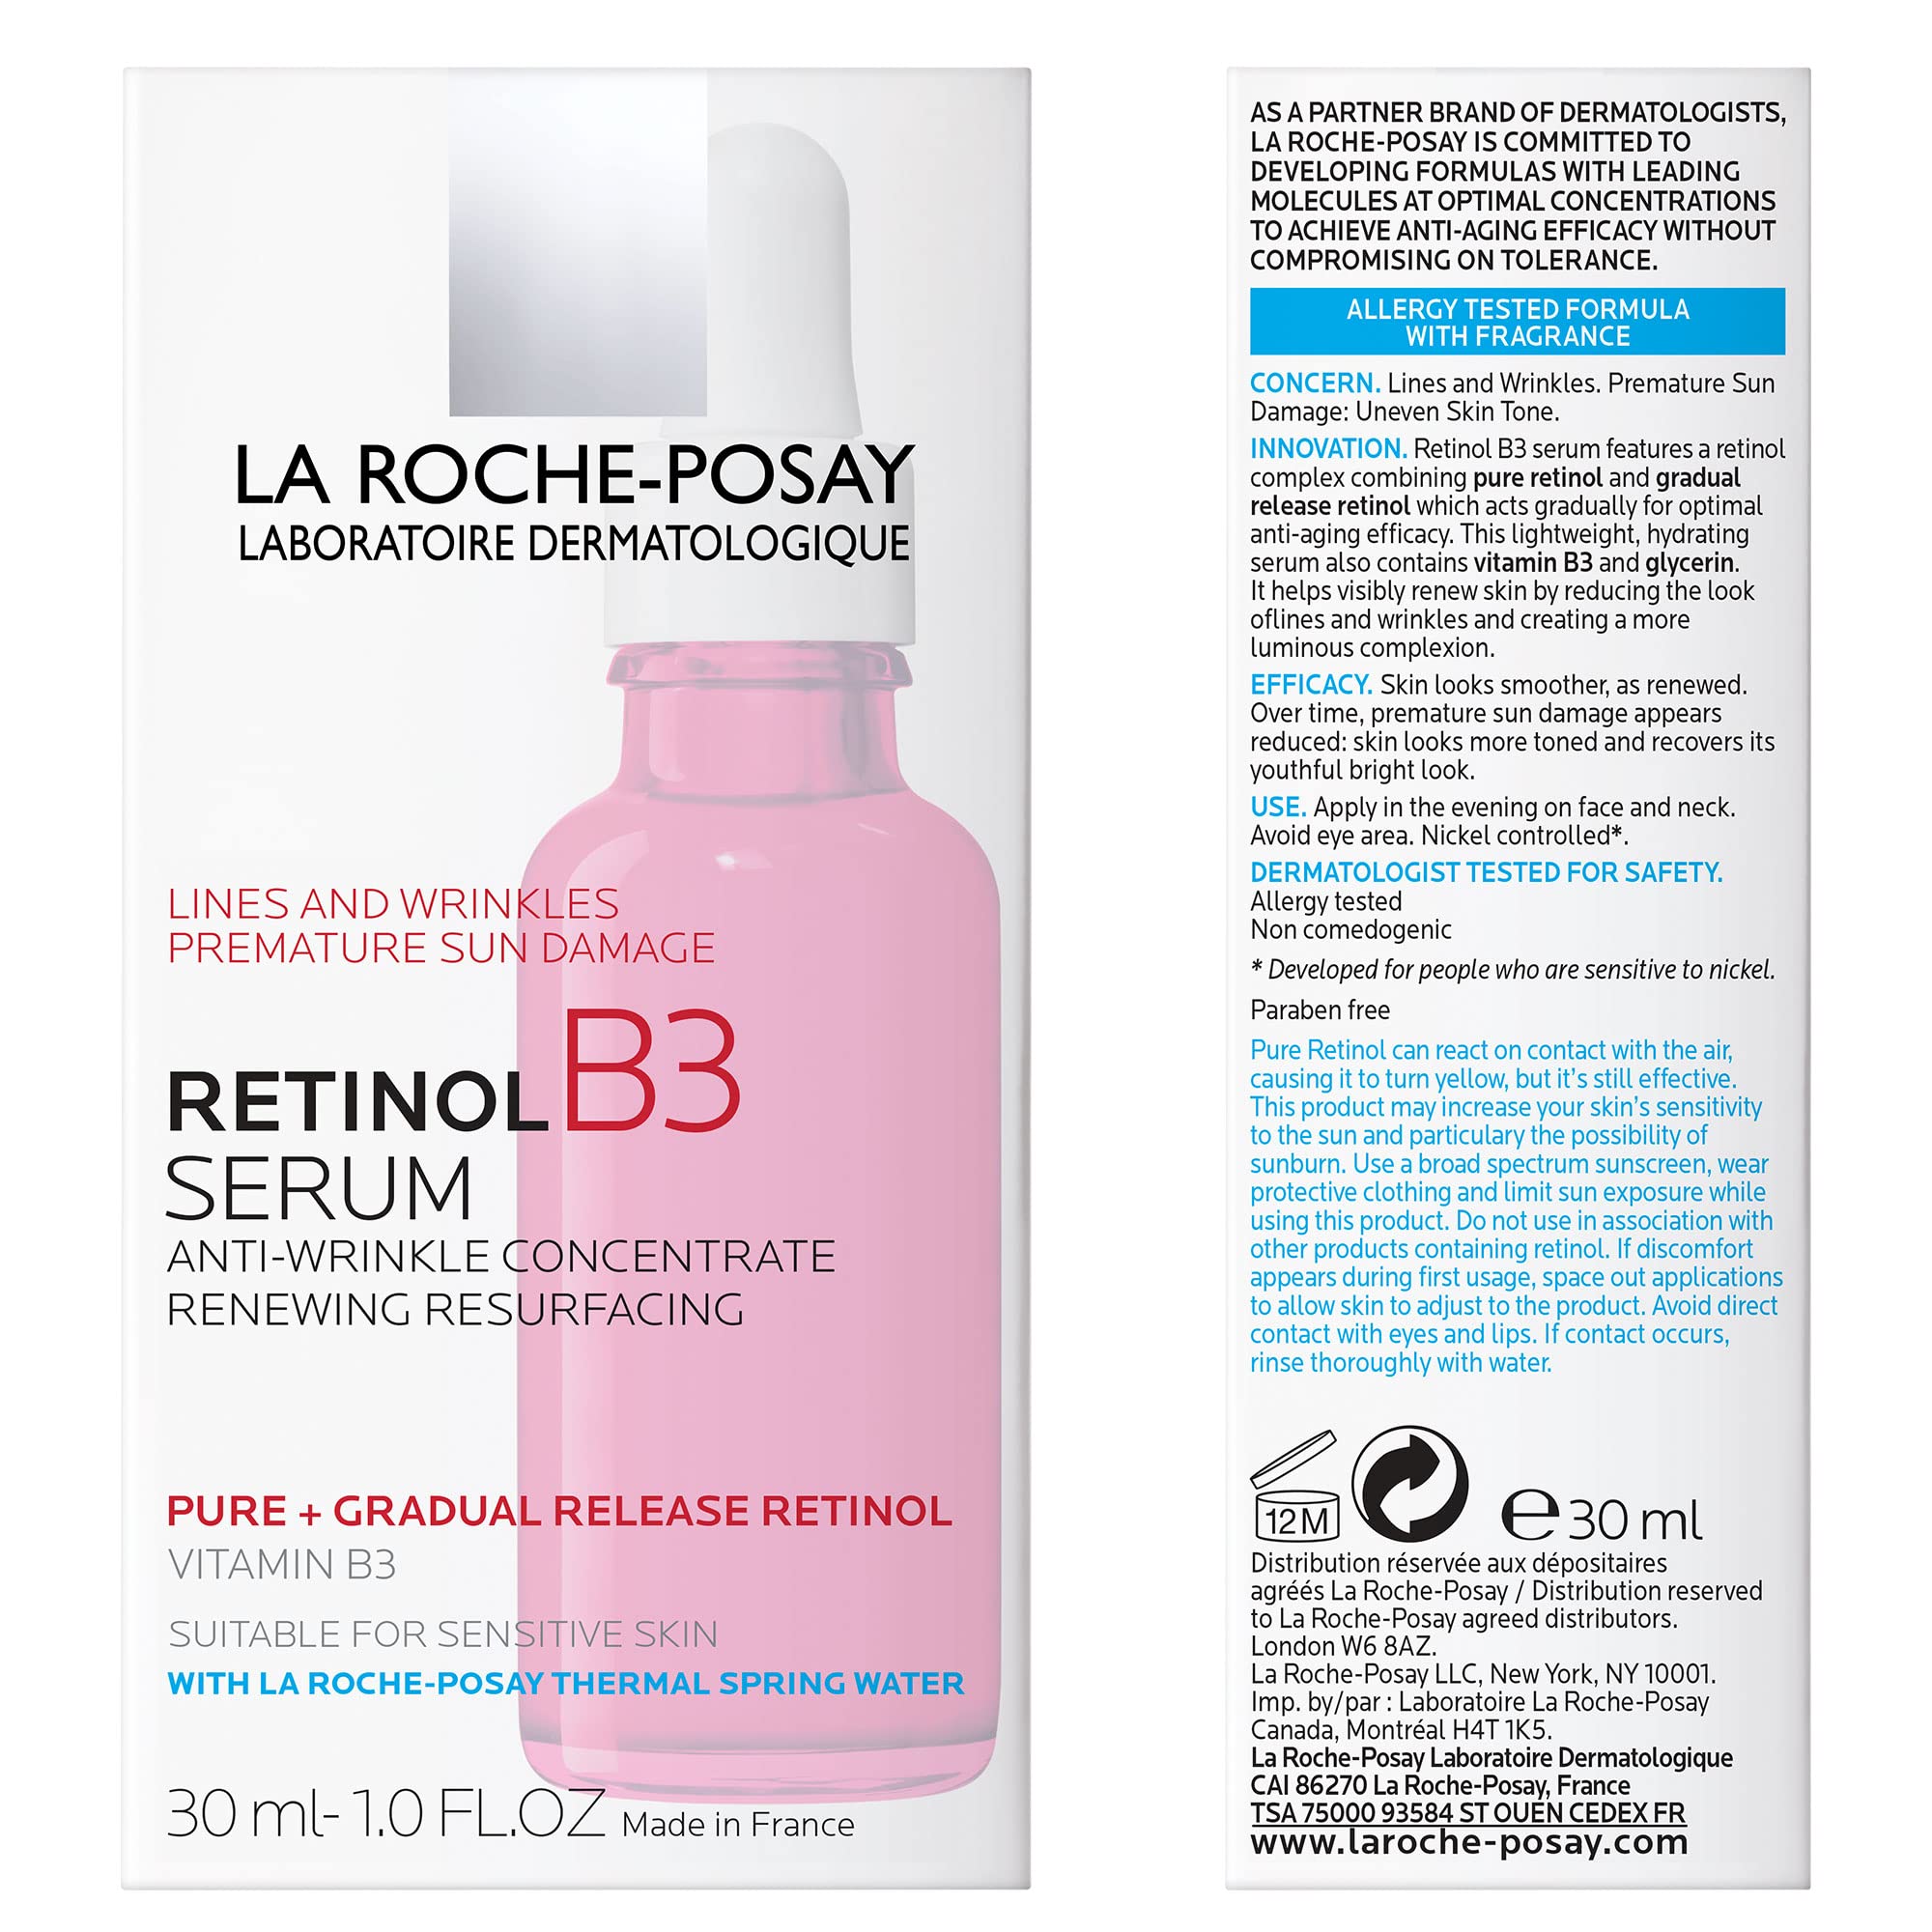 La Roche-Posay Pure Retinol Face Serum with Vitamin B3. Anti Aging Face Serum for Lines, Wrinkles & Premature Sun Damage to Resurface & Hydrate. Suitable for Sensitive Skin, 1.0 Fl. Oz